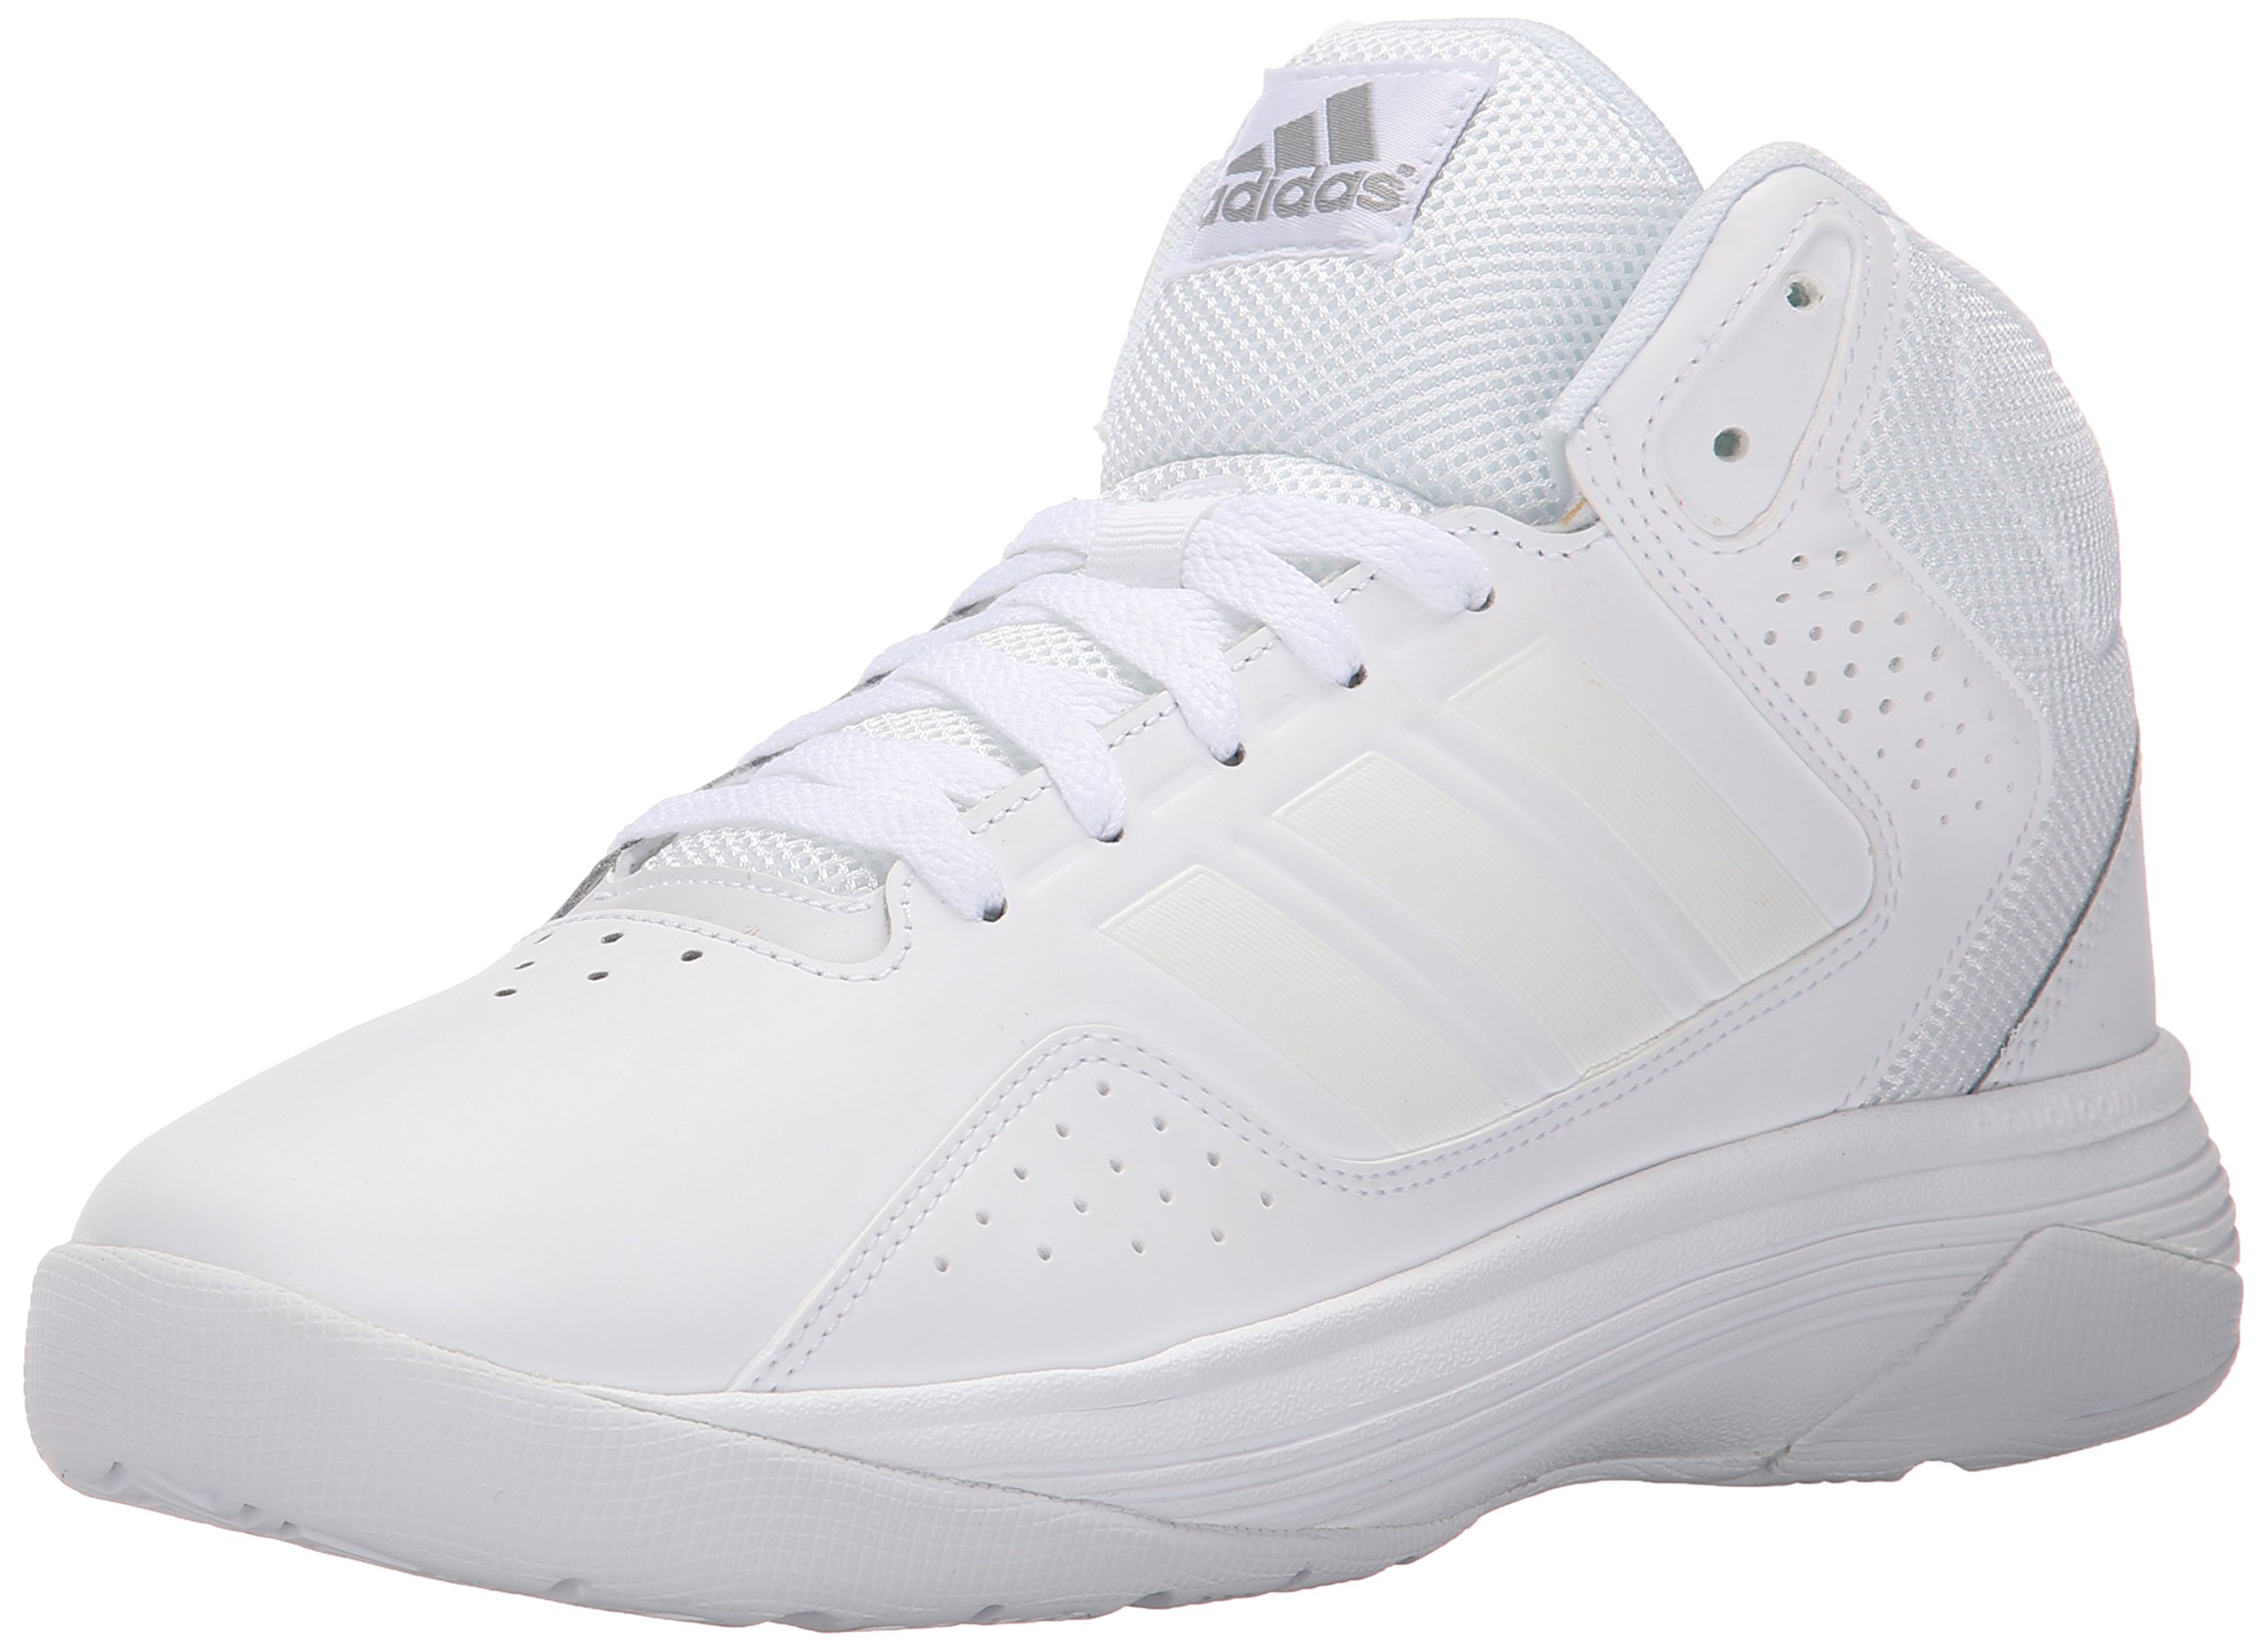 basketball shoes review 219